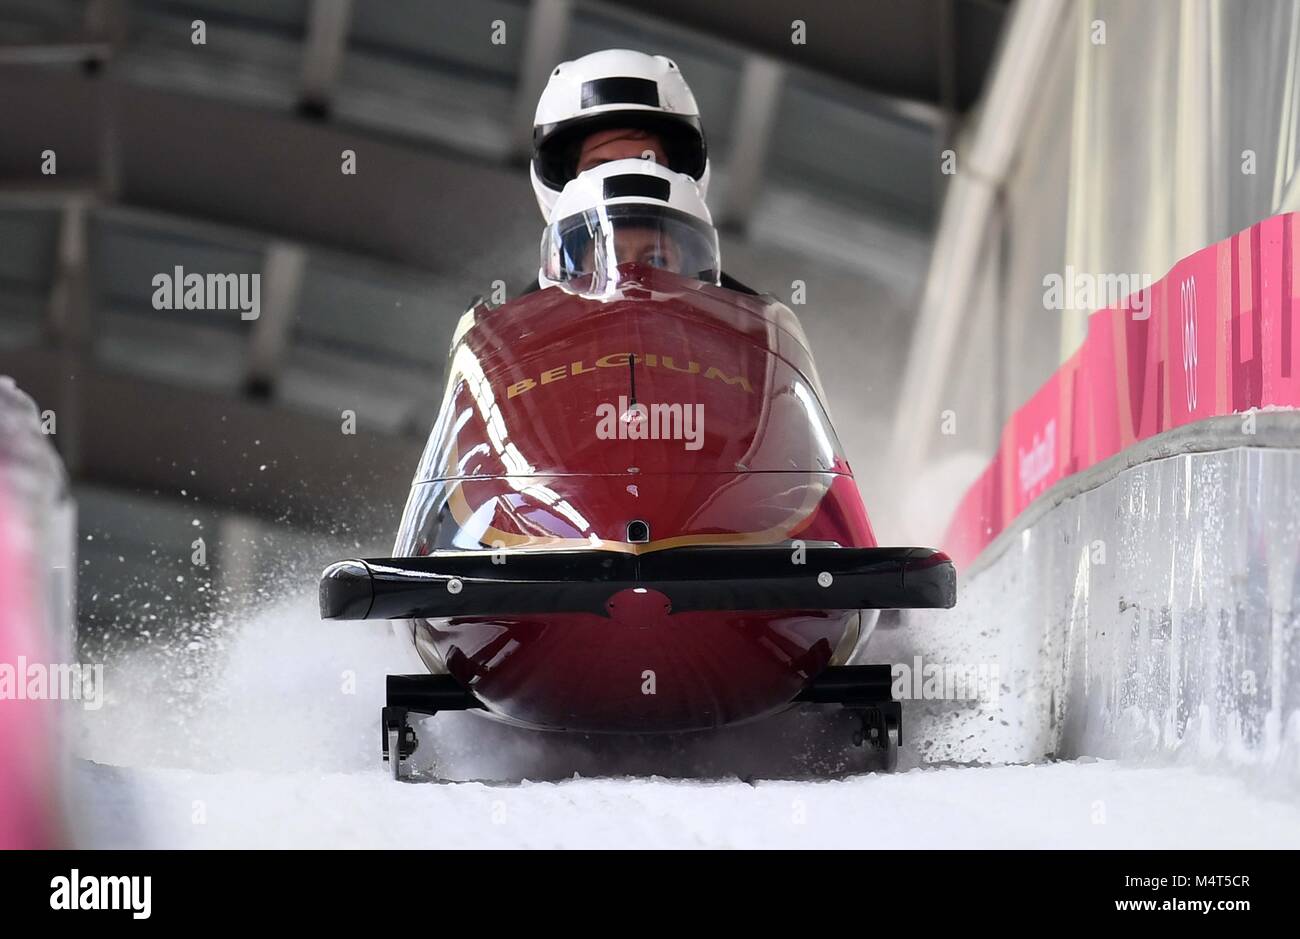 Elfje Willemsen (BEL) and Sara Aerts (BEL). Womens bobsleigh training. Alpensia sliding centre. Pyeongchang2018 winter Olympics. Alpensia. Republic of Korea. 17/02/2018. Credit: Sport In Pictures/Alamy Live News Stock Photo